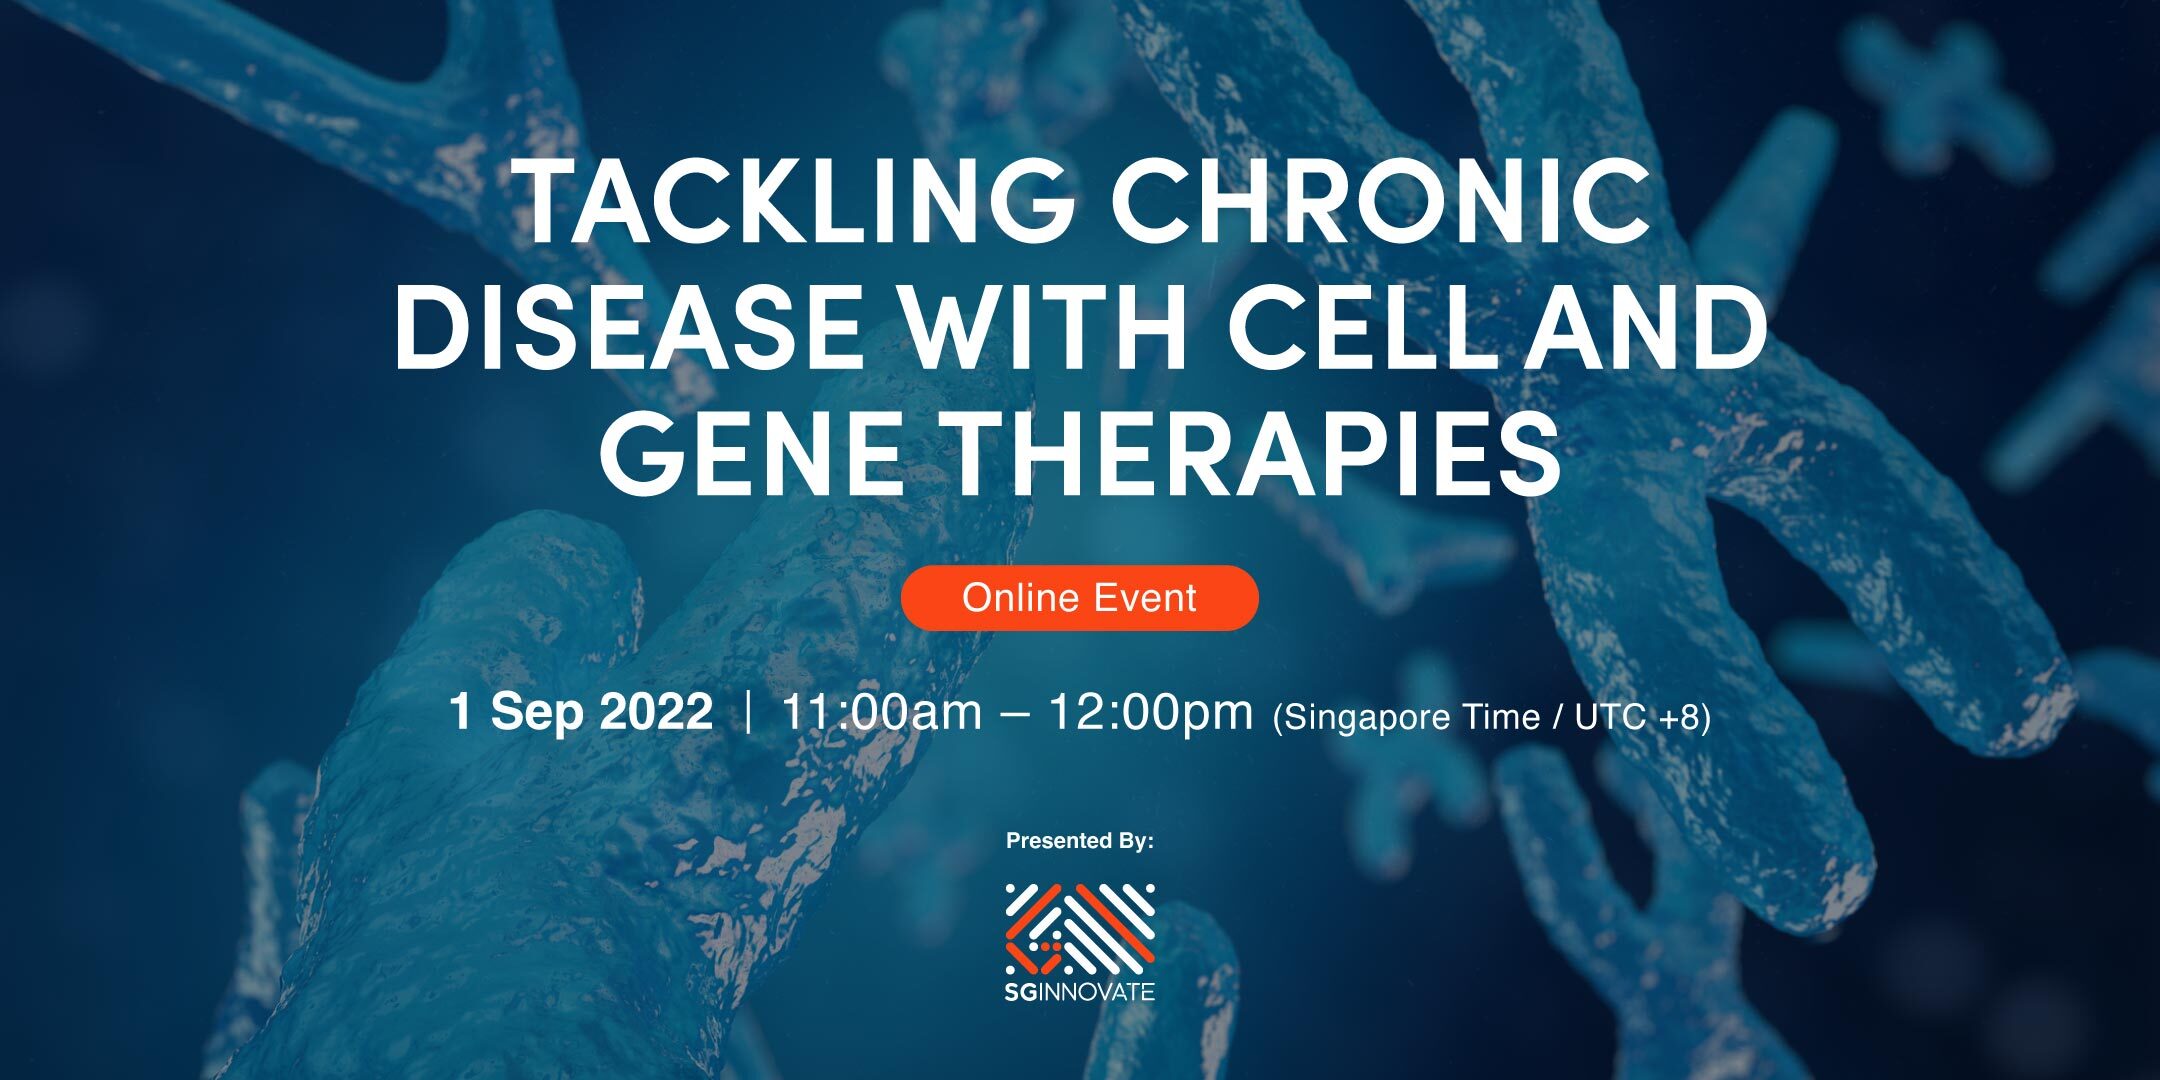 Tackling Chronic Disease with Cell and Gene Therapies